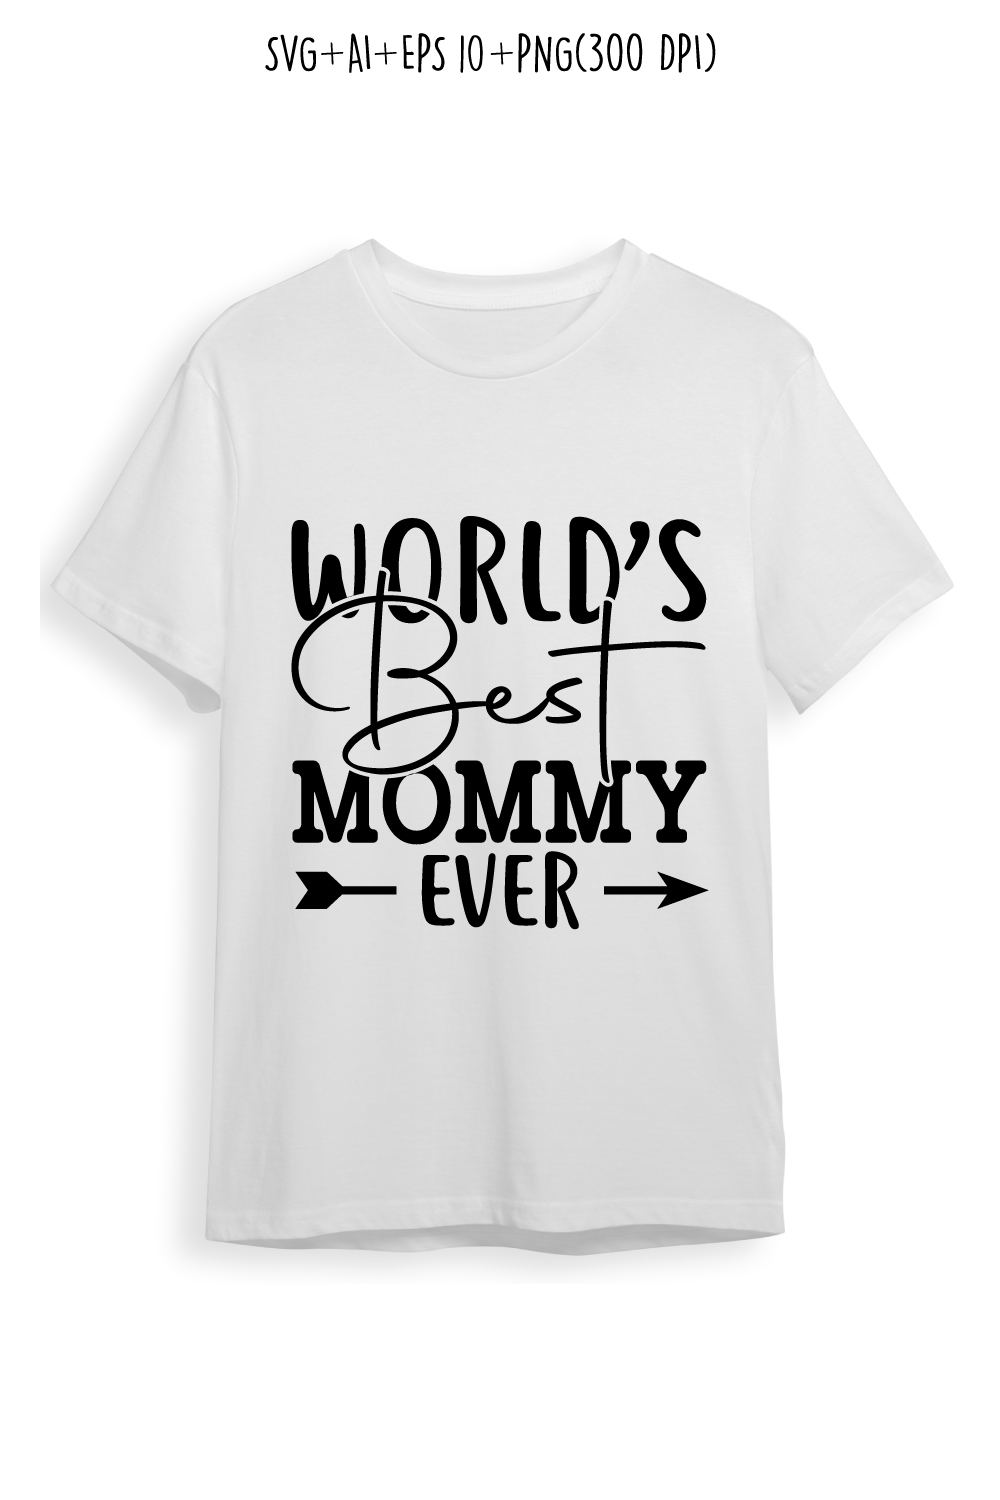 world's best mommy ever SVG design for t-shirts, cards, frame artwork, phone cases, bags, mugs, stickers, tumblers, print, etc pinterest preview image.